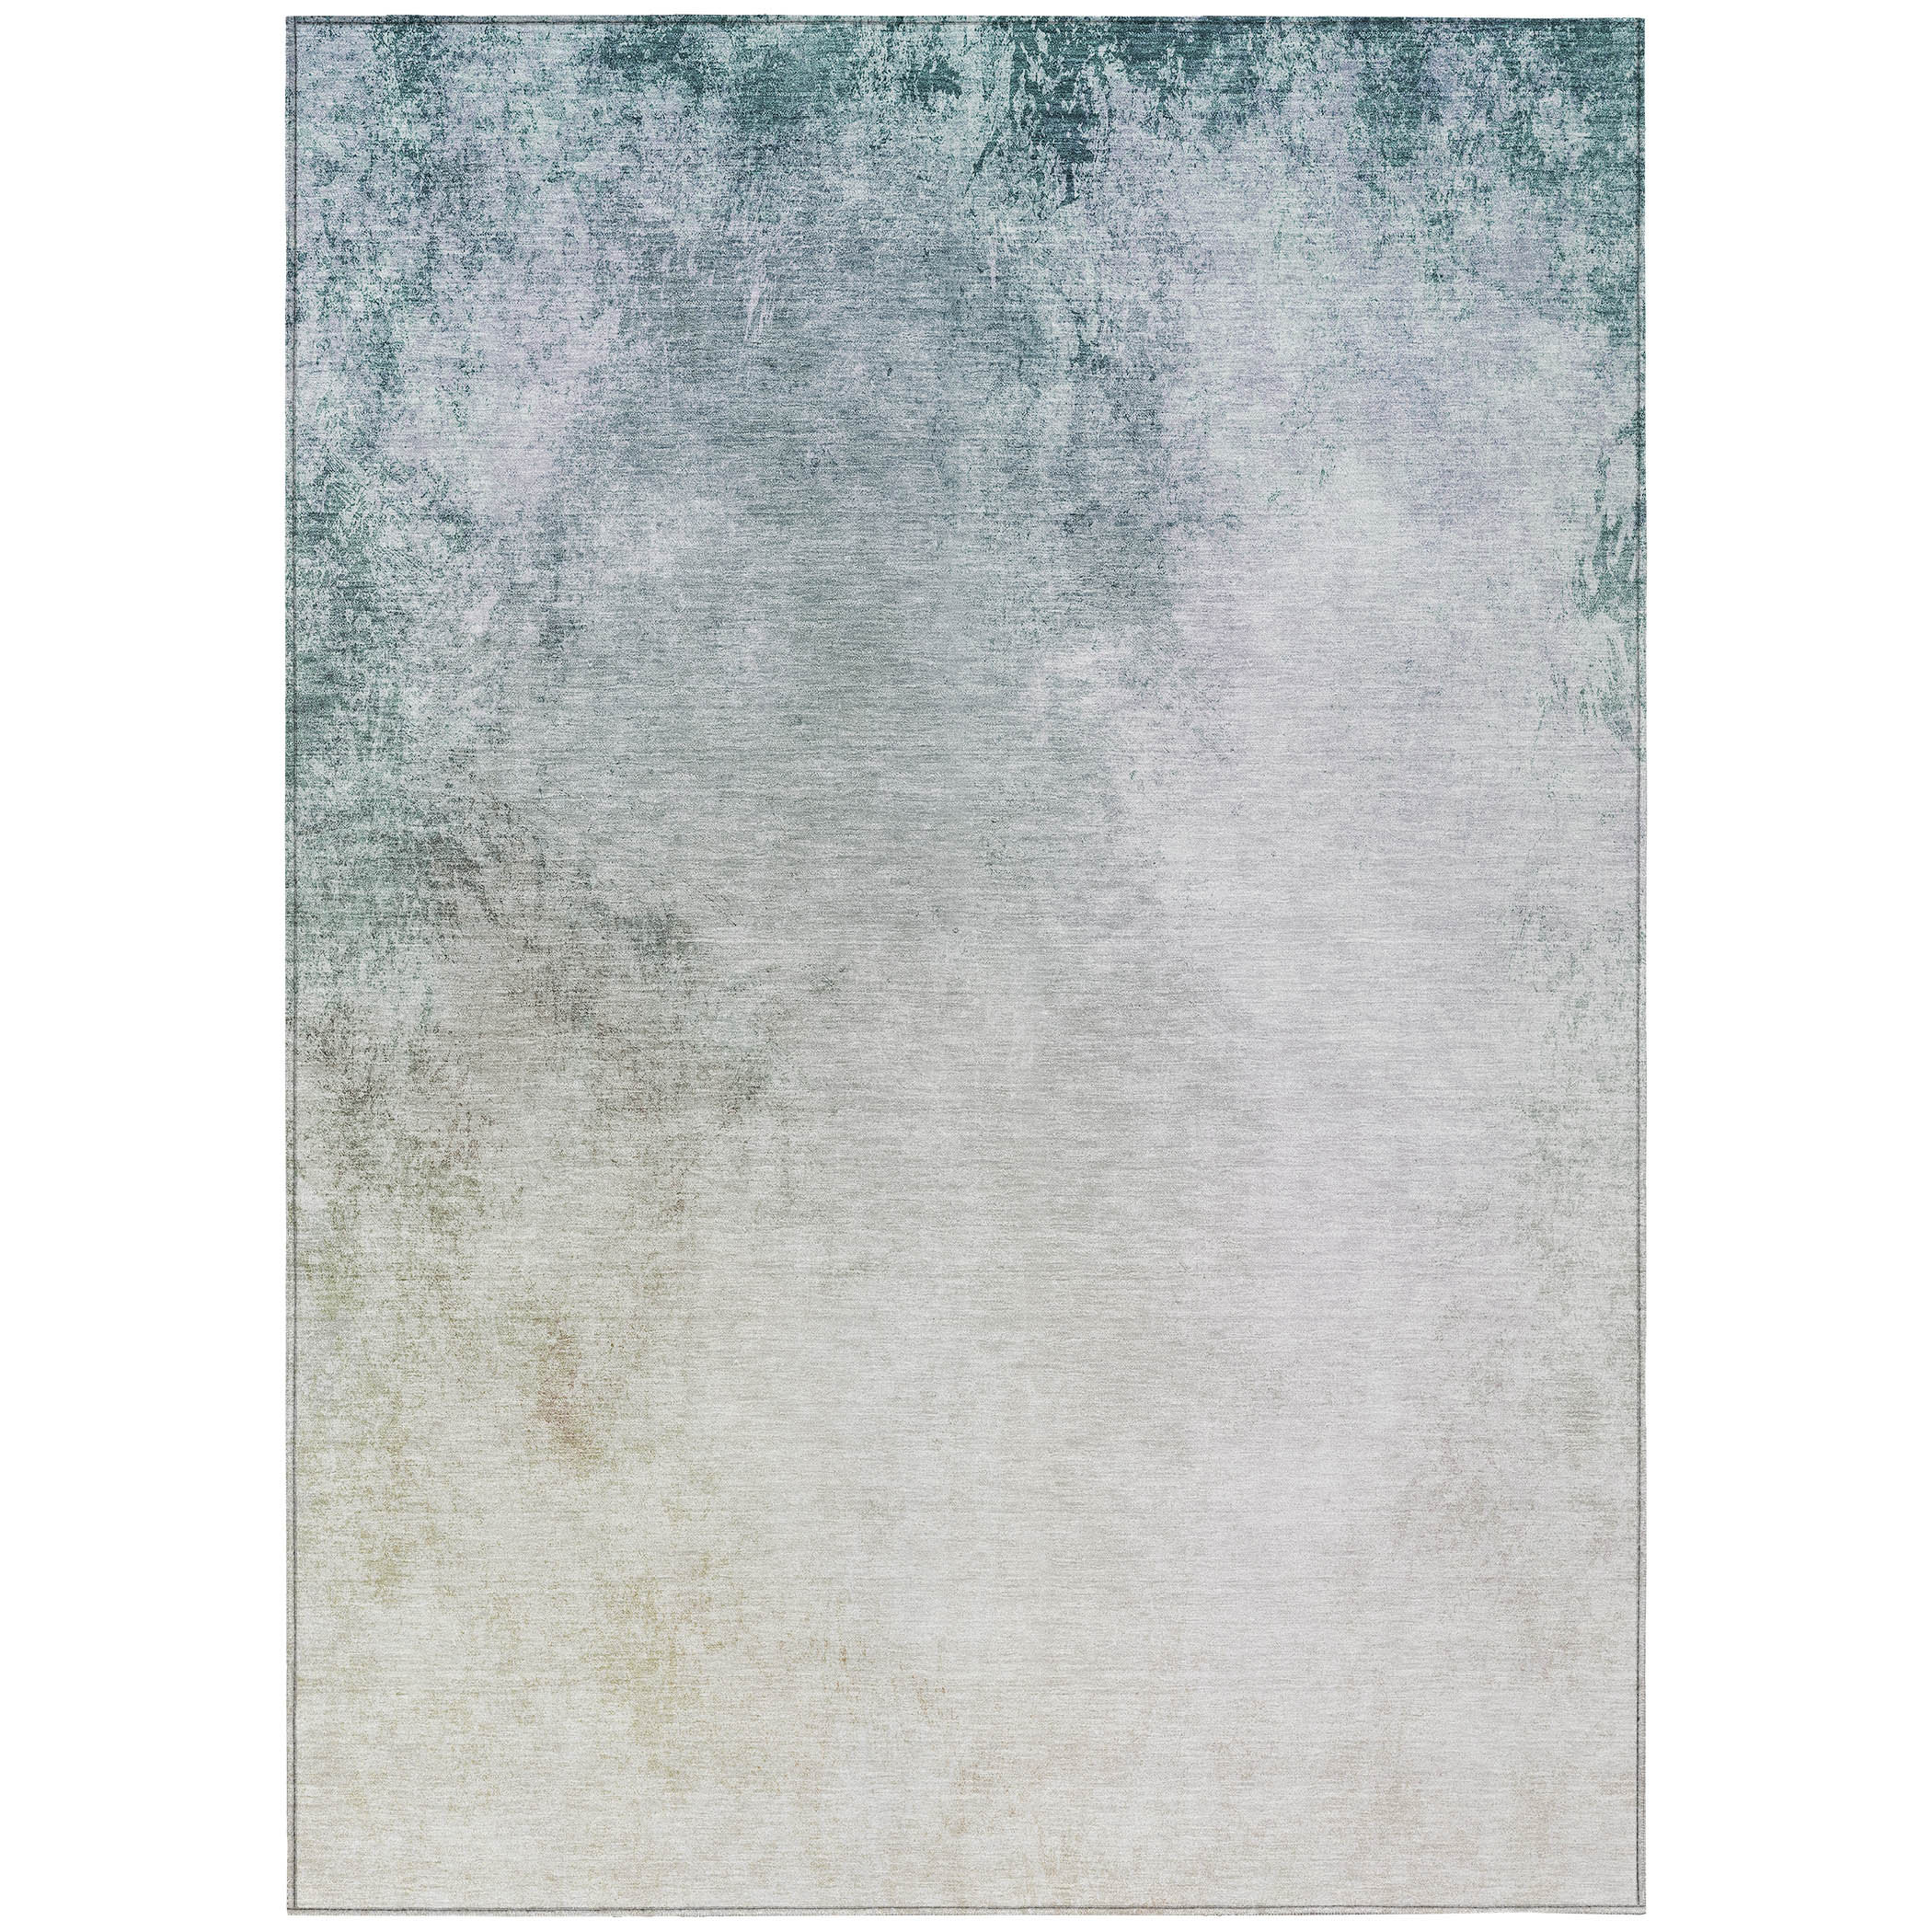 Kailianna Abstract Beige Area Rug 17 Stories Rug Size: Rectangle 6' x 9